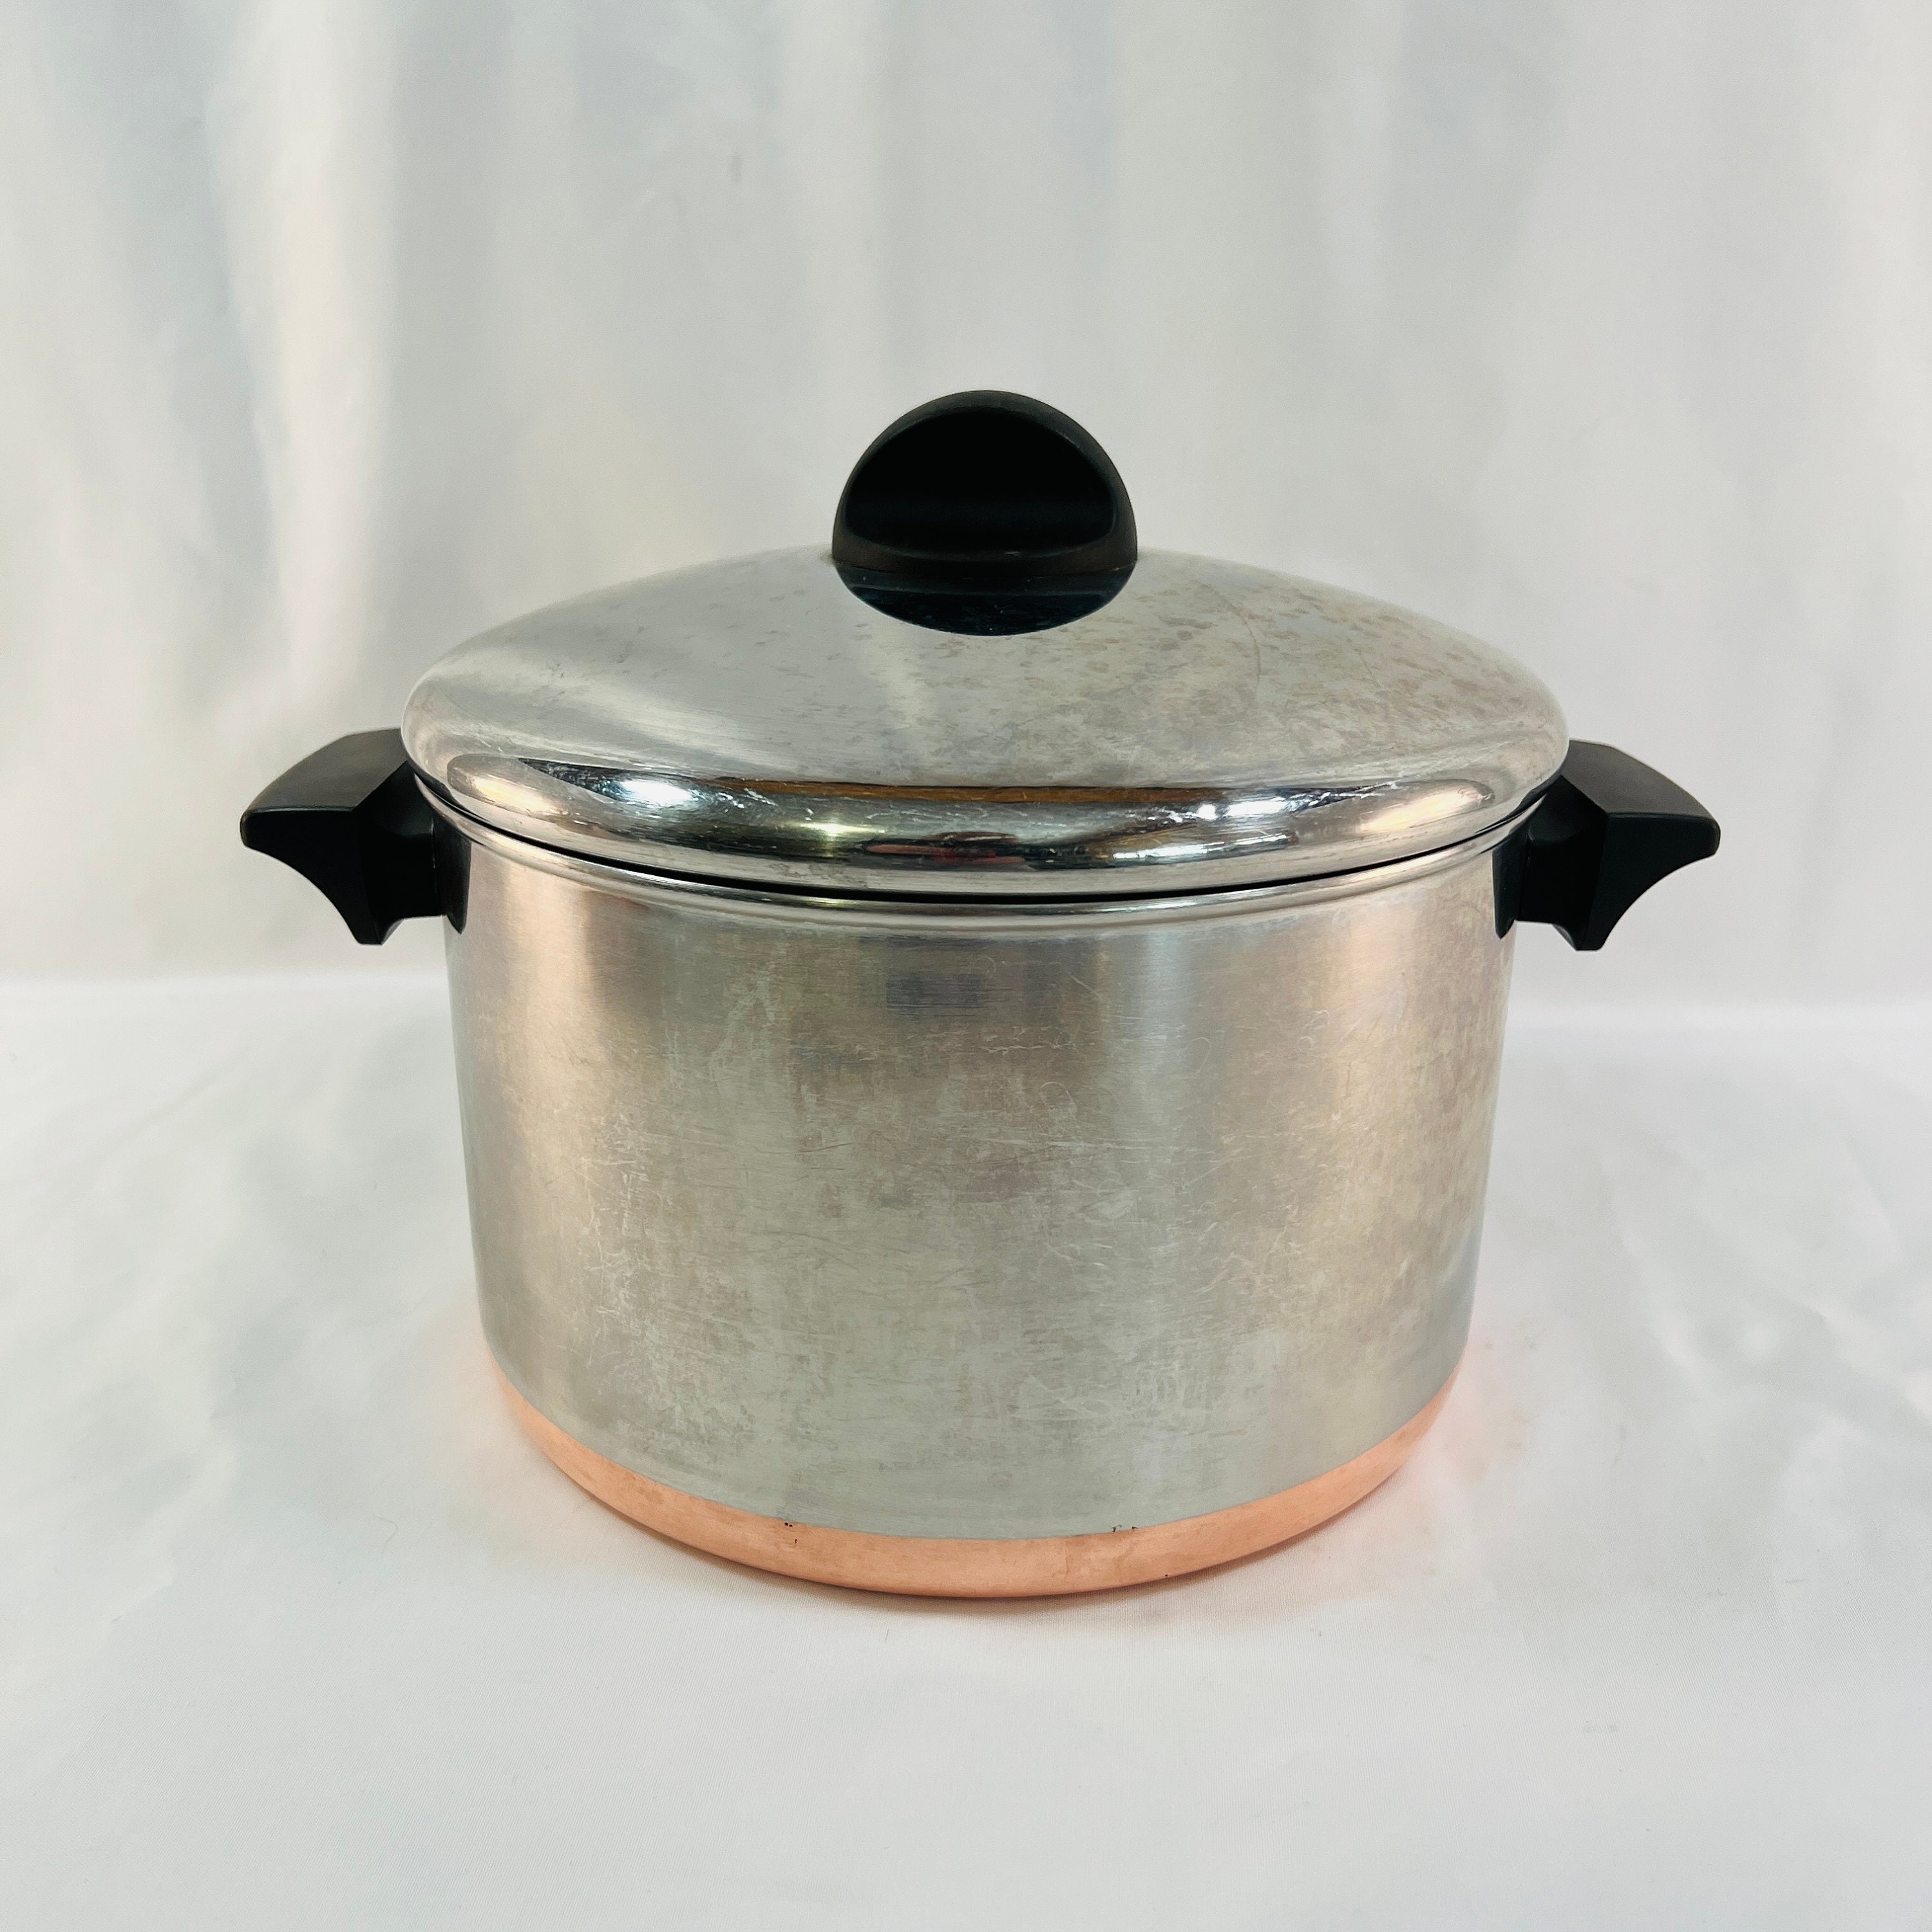 Maid of Honor Copper Bottom Stainless Steel Pot With Lid Sears Roebuck  Vintage 8